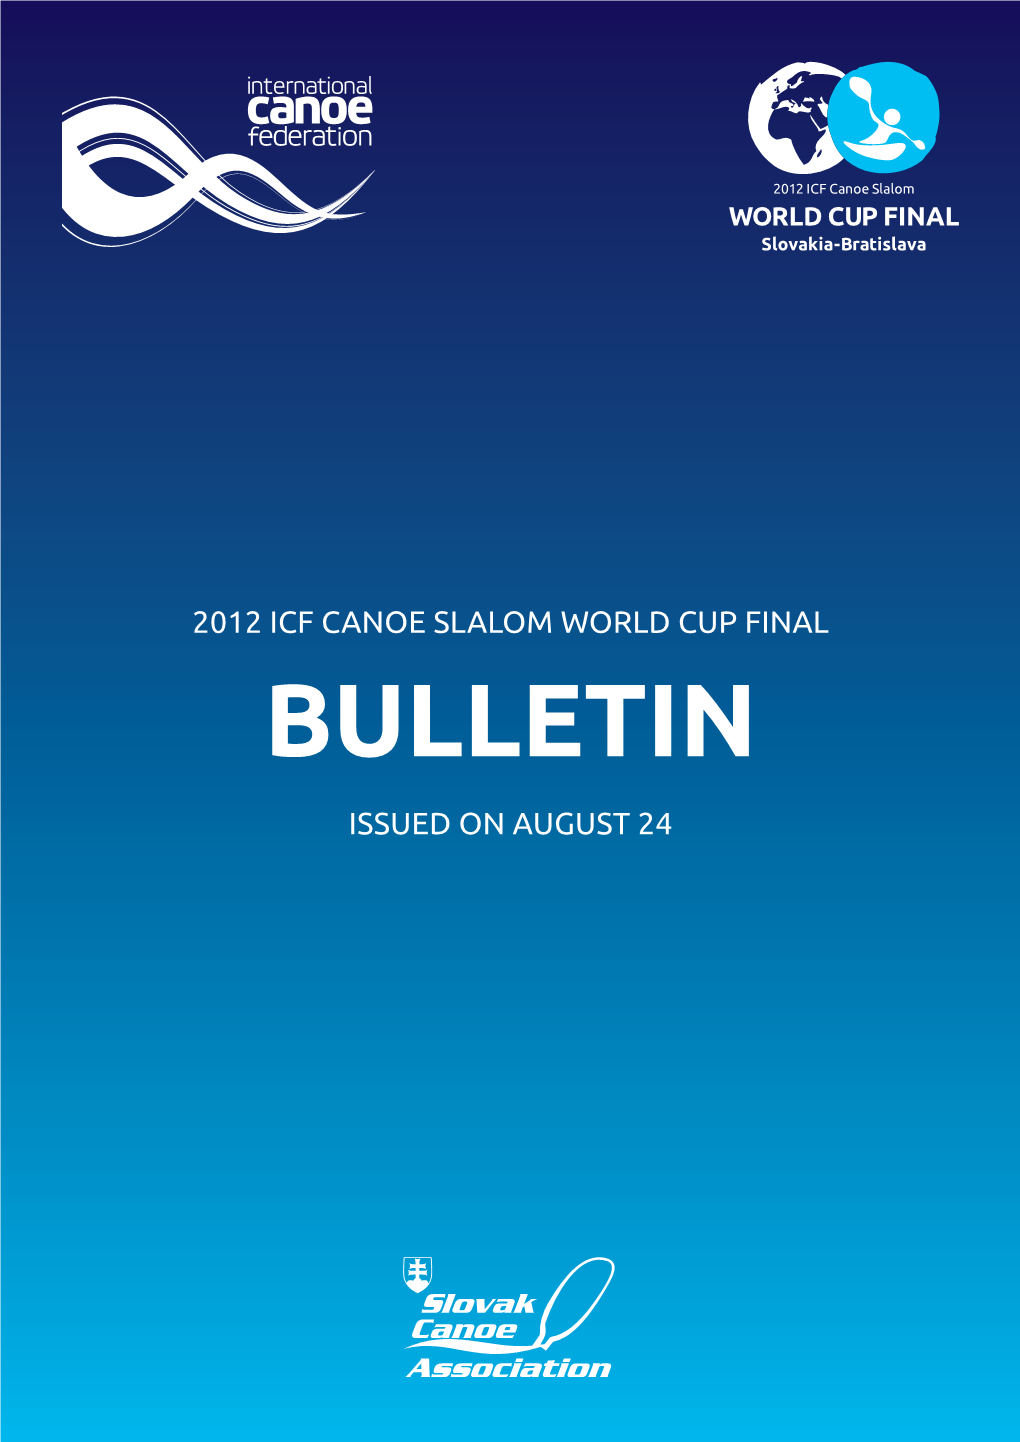 Bulletin Issued on AUGUST 24 Sport Is “ Our Passion Contents